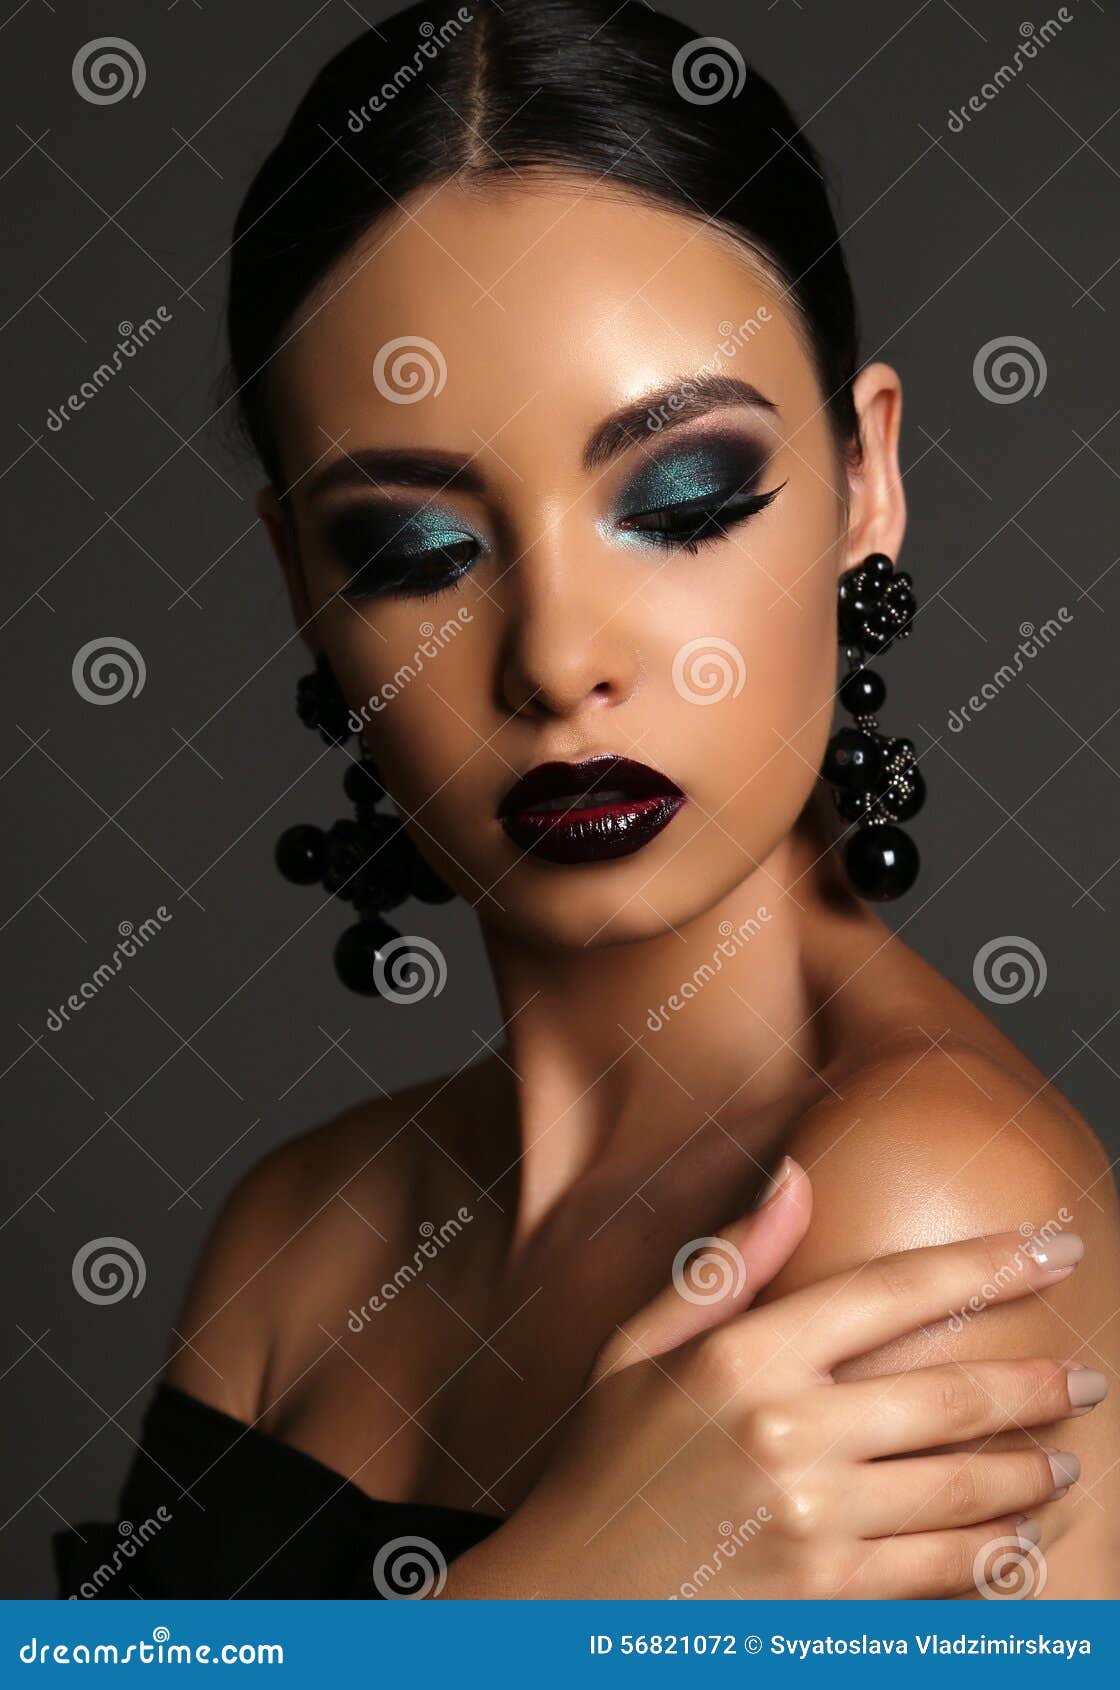 beautiful girl with dark hair with bright extravagant makeup and bijou